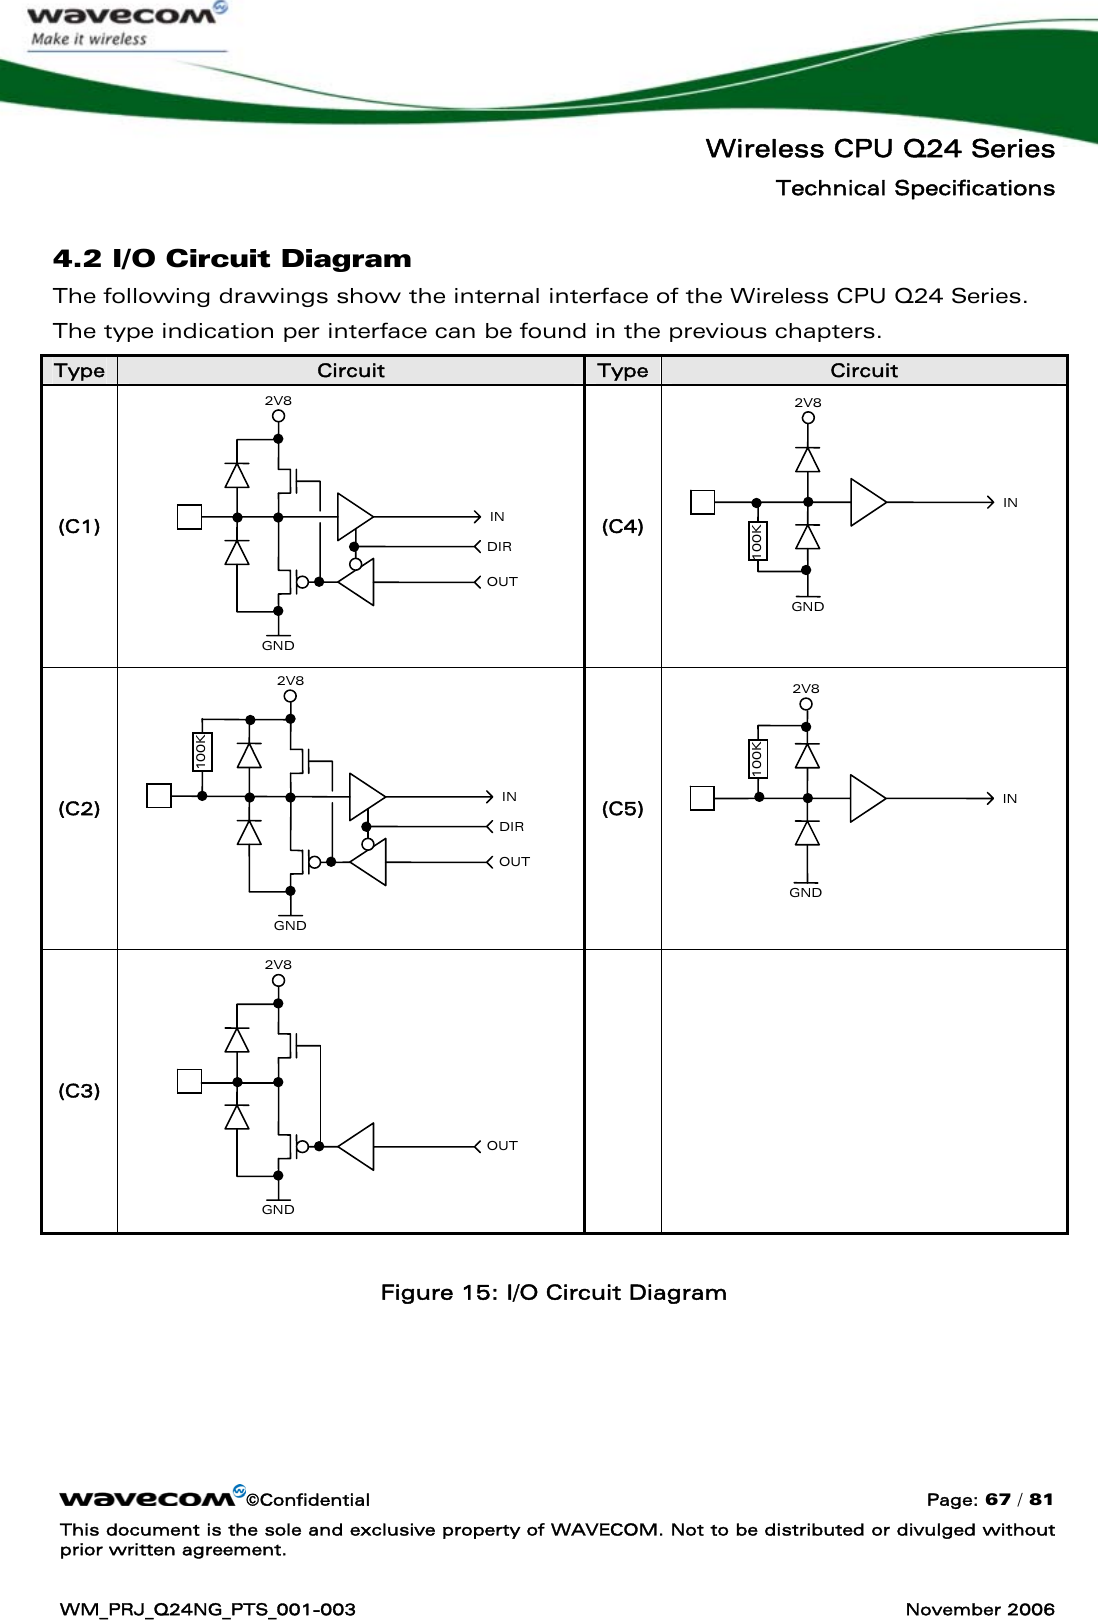   Wireless CPU Q24 Series Technical Specifications ©Confidential  Page: 67 / 81 This document is the sole and exclusive property of WAVECOM. Not to be distributed or divulged without prior written agreement.  WM_PRJ_Q24NG_PTS_001-003  November 2006  4.2 I/O Circuit Diagram The following drawings show the internal interface of the Wireless CPU Q24 Series. The type indication per interface can be found in the previous chapters. Type  Circuit  Type  Circuit (C1)  (C4)  (C2)  (C5)  (C3)     Figure 15: I/O Circuit Diagram  100K GND 2V8 IN 100K GND 2V8 IN GND 2V8 IN DIR OUT 100K GND 2V8 OUT GND 2V8 IN DIR OUT 